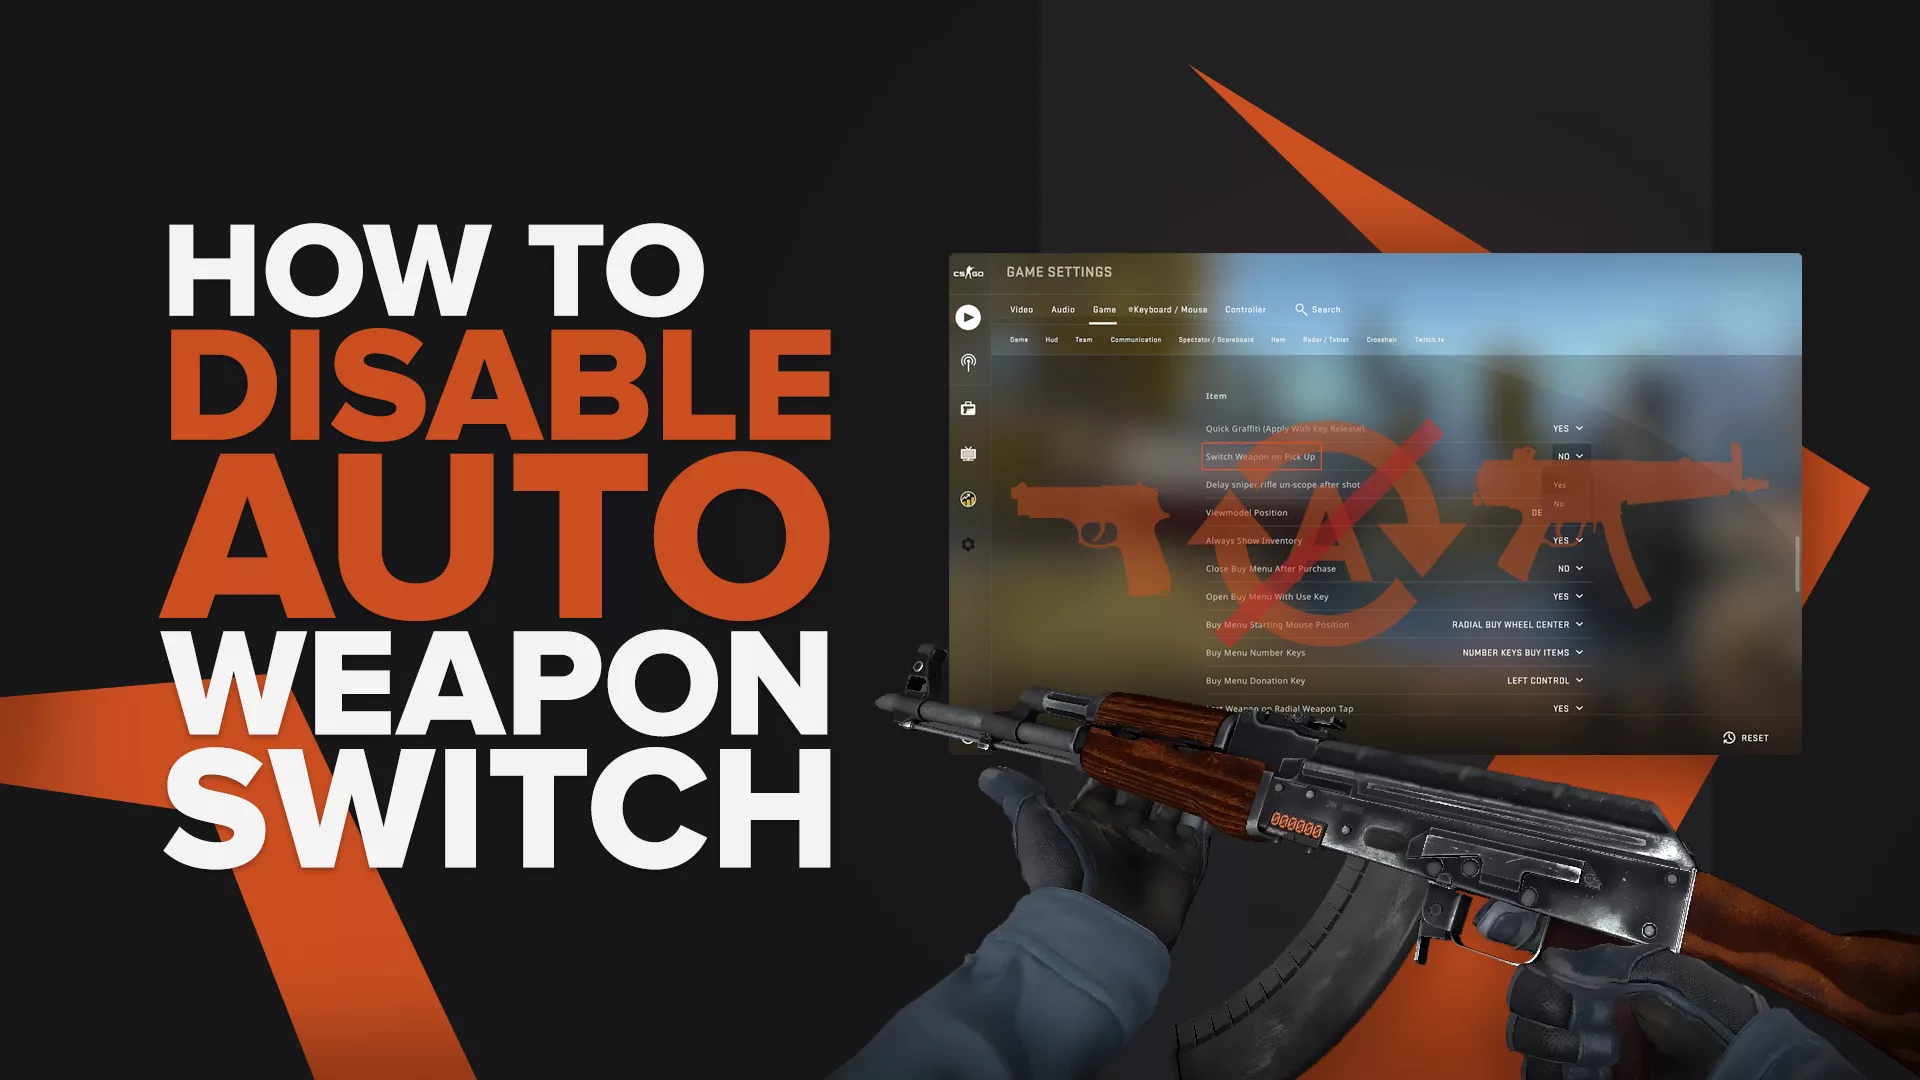 How To Disable Auto Weapon Switch in CSGO?